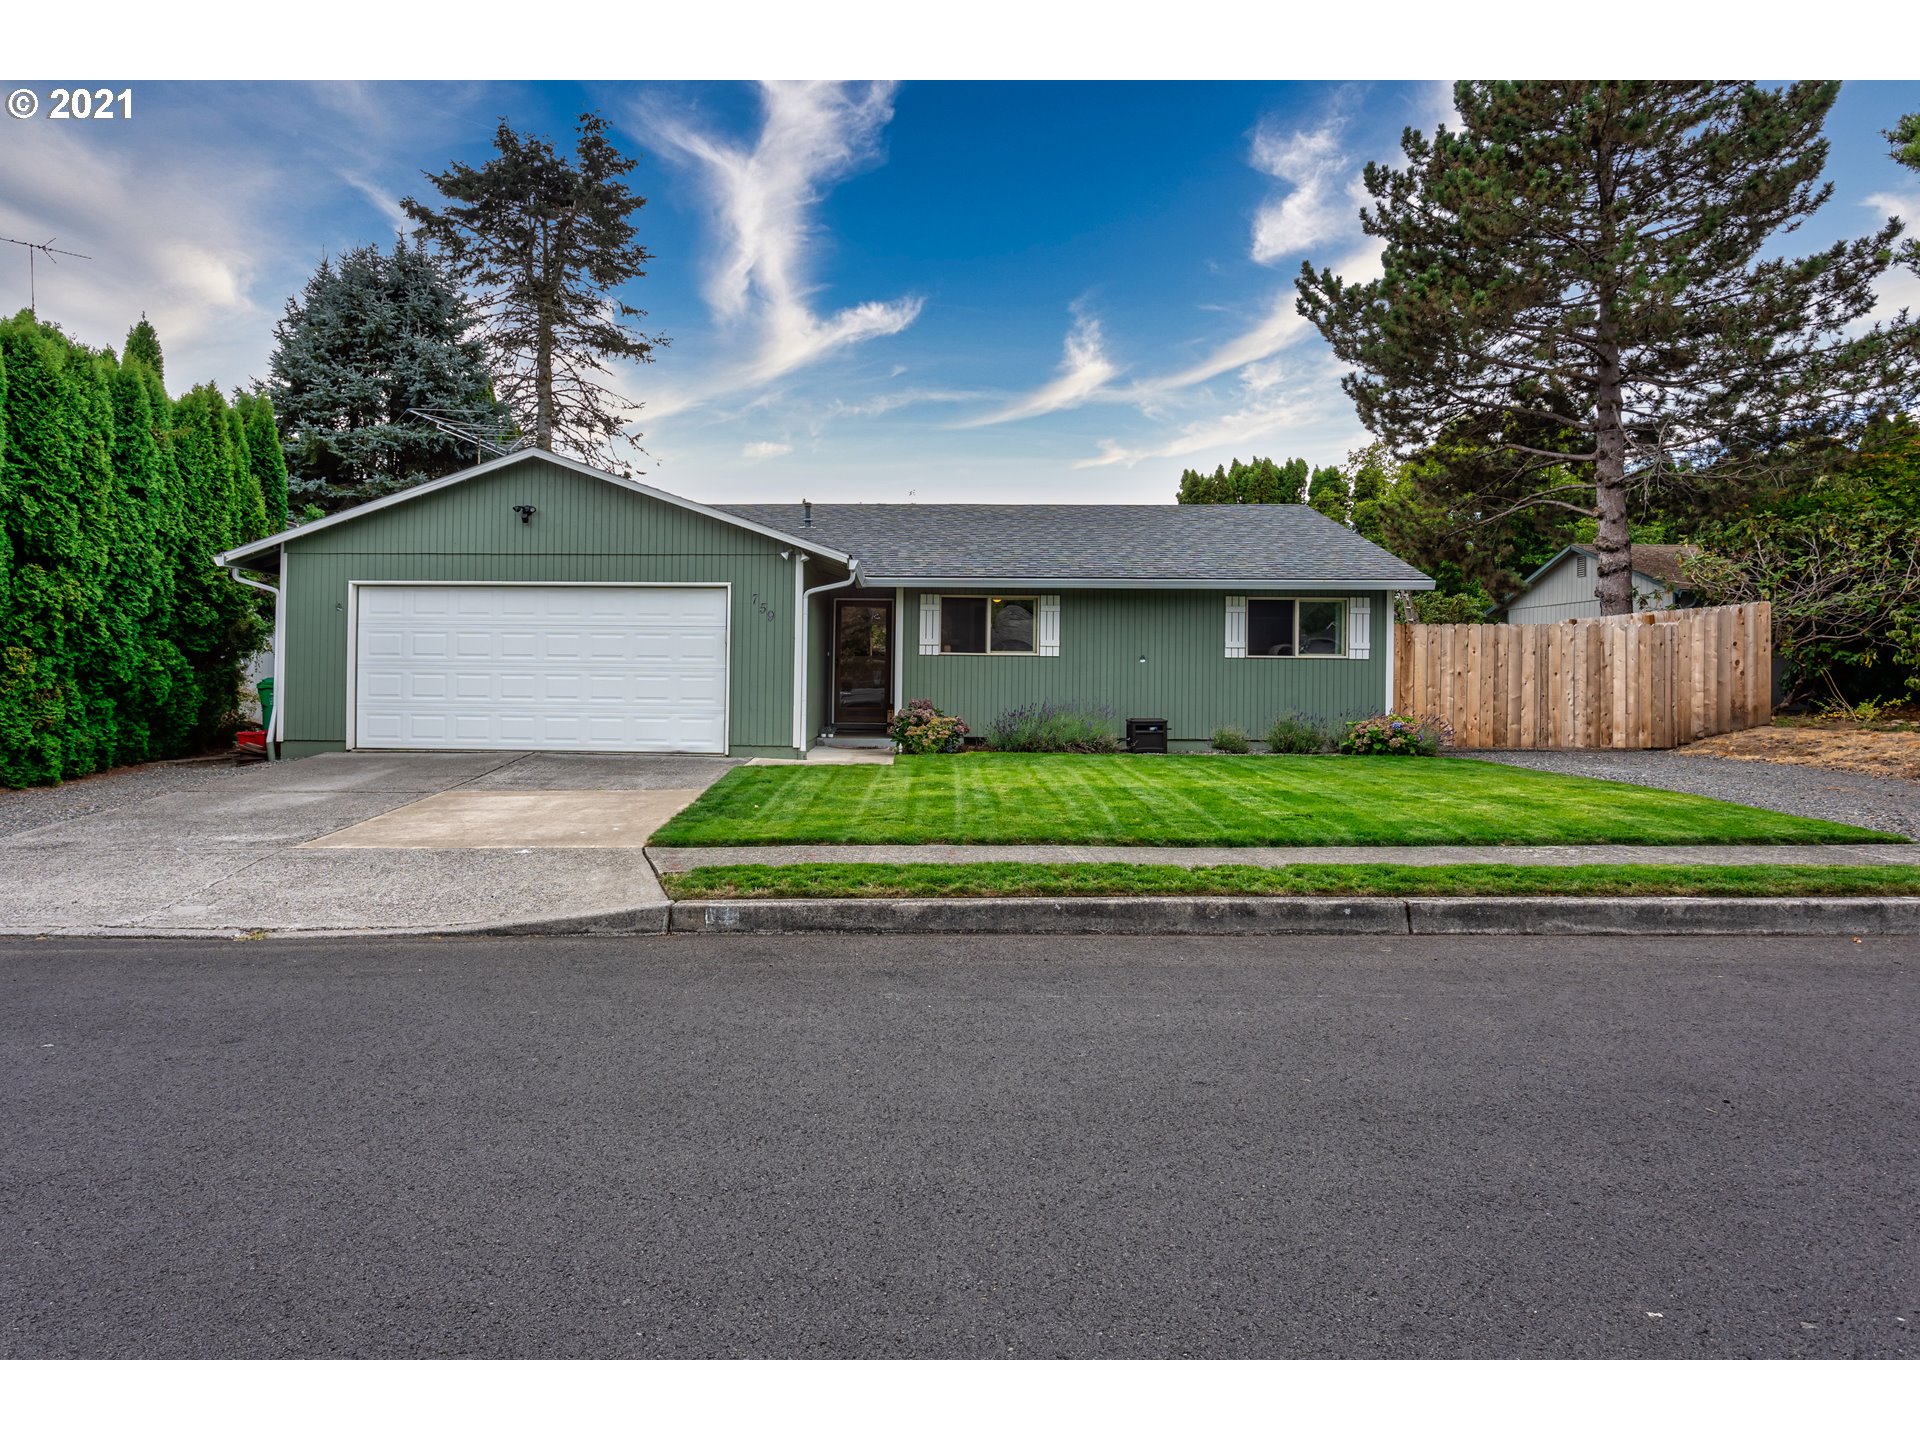 759 SW WILLOWBROOK AVE (1 of 25)